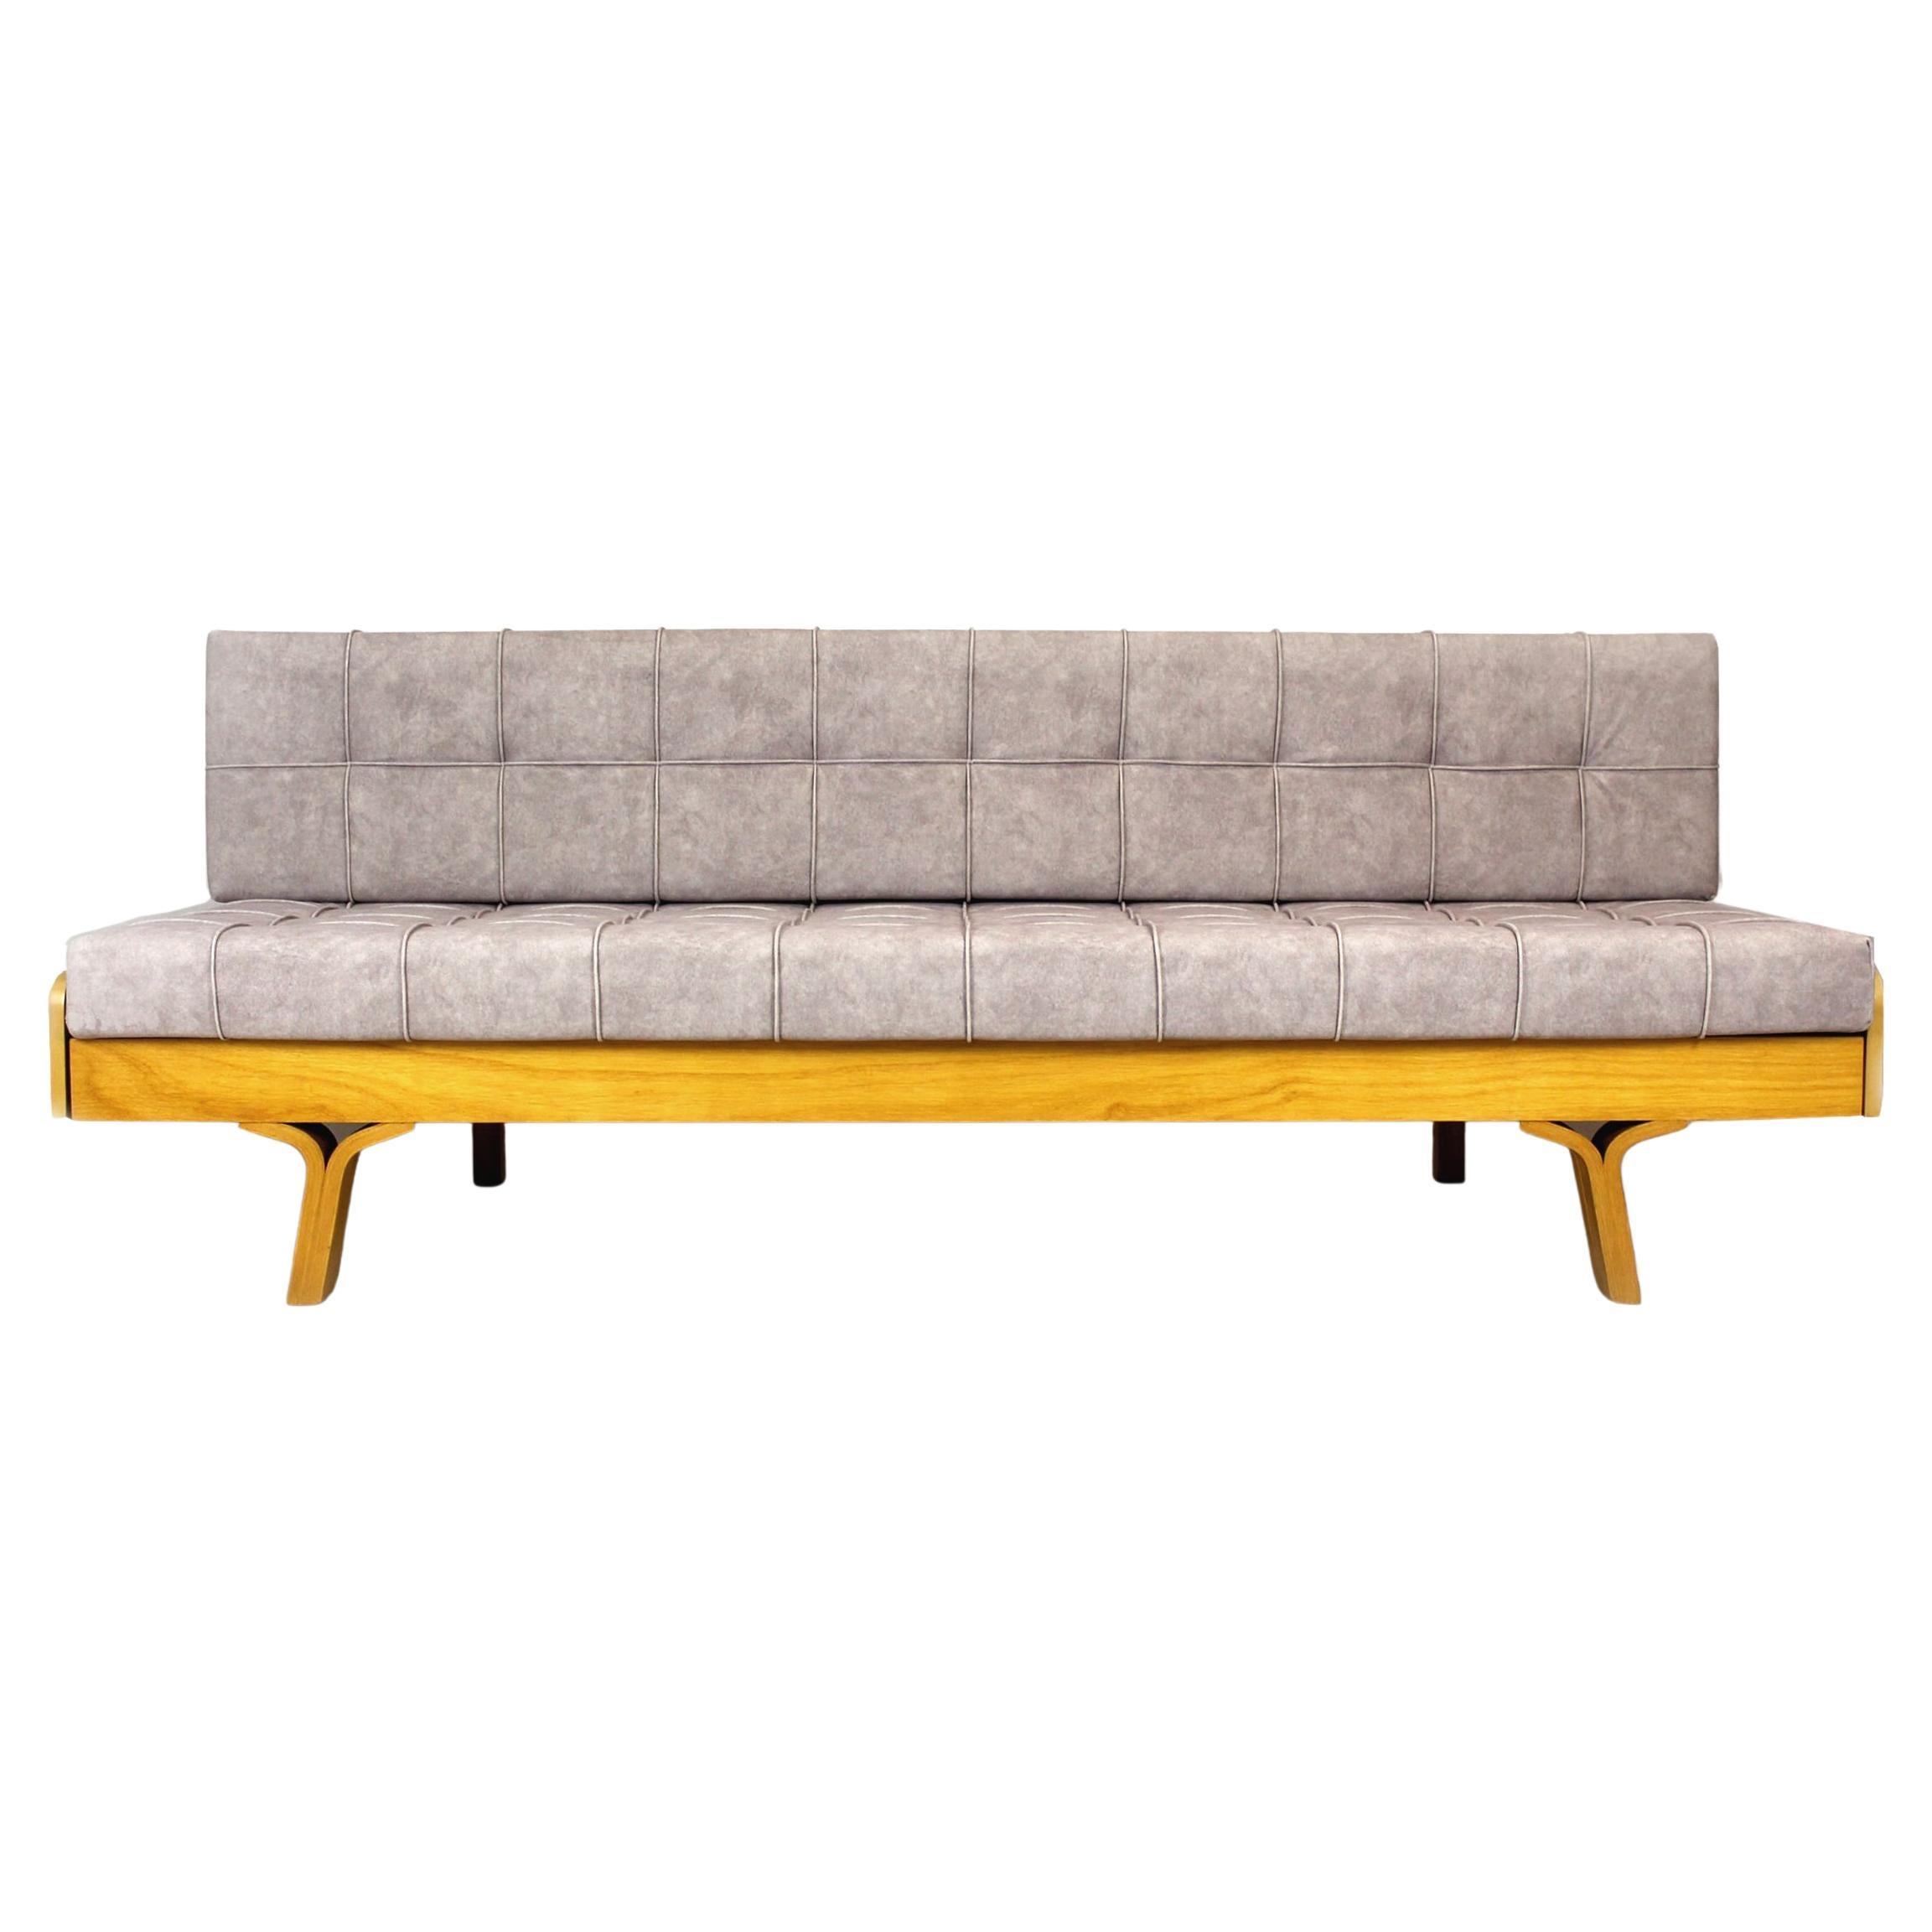 Restored Mid-Century Convertible Sofa by Ludvik Volak for Holesov, 1960s